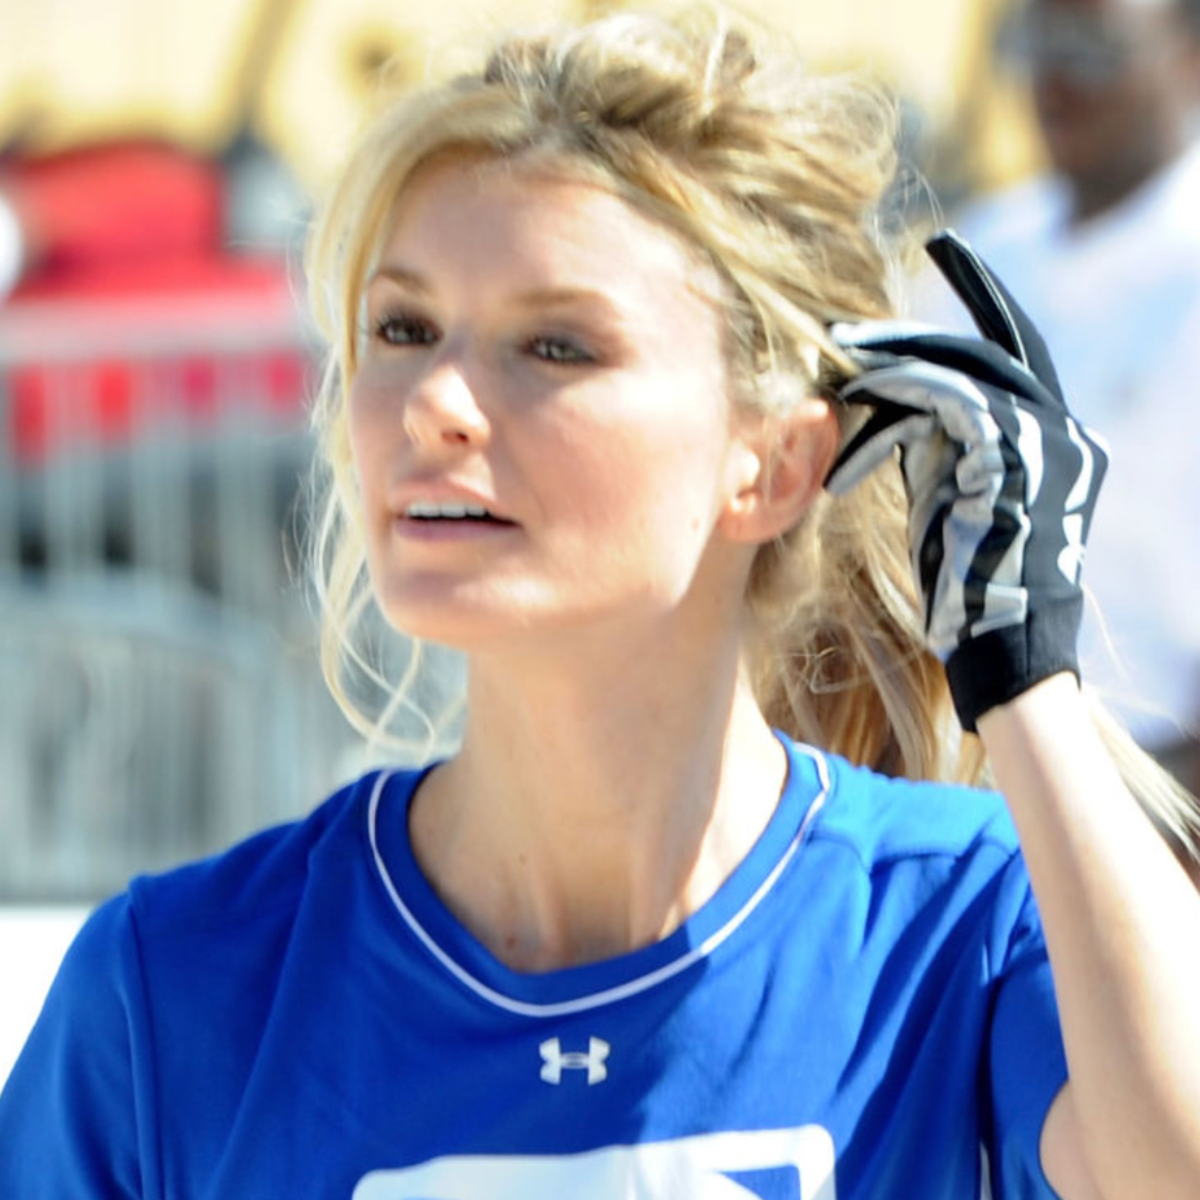 Marisa Miller is a real hit with fans at celebrity softball game